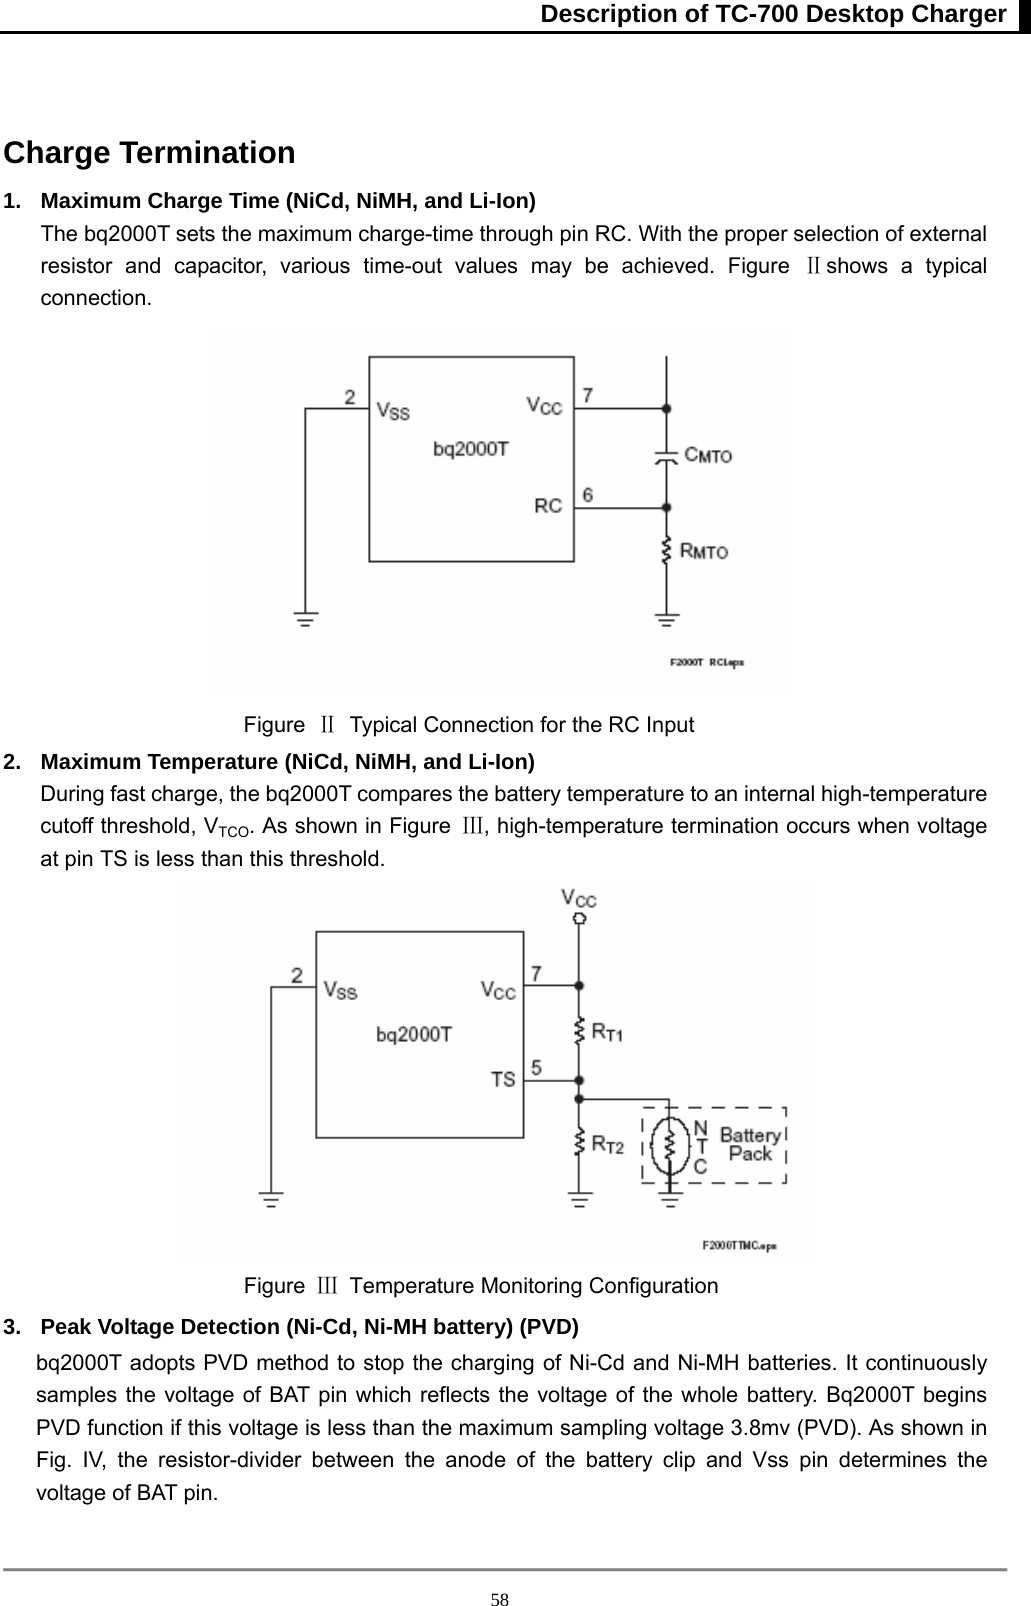 Description of TC-700 Desktop Charger  58 Charge Termination 1.  Maximum Charge Time (NiCd, NiMH, and Li-Ion) The bq2000T sets the maximum charge-time through pin RC. With the proper selection of external resistor and capacitor, various time-out values may be achieved. Figure Ⅱshows a typical connection.   Figure  Ⅱ  Typical Connection for the RC Input   2.  Maximum Temperature (NiCd, NiMH, and Li-Ion) During fast charge, the bq2000T compares the battery temperature to an internal high-temperature cutoff threshold, VTCO. As shown in Figure  Ⅲ, high-temperature termination occurs when voltage at pin TS is less than this threshold.    Figure  Ⅲ  Temperature Monitoring Configuration   3.  Peak Voltage Detection (Ni-Cd, Ni-MH battery) (PVD) bq2000T adopts PVD method to stop the charging of Ni-Cd and Ni-MH batteries. It continuously samples the voltage of BAT pin which reflects the voltage of the whole battery. Bq2000T begins PVD function if this voltage is less than the maximum sampling voltage 3.8mv (PVD). As shown in Fig. IV, the resistor-divider between the anode of the battery clip and Vss pin determines the voltage of BAT pin.  